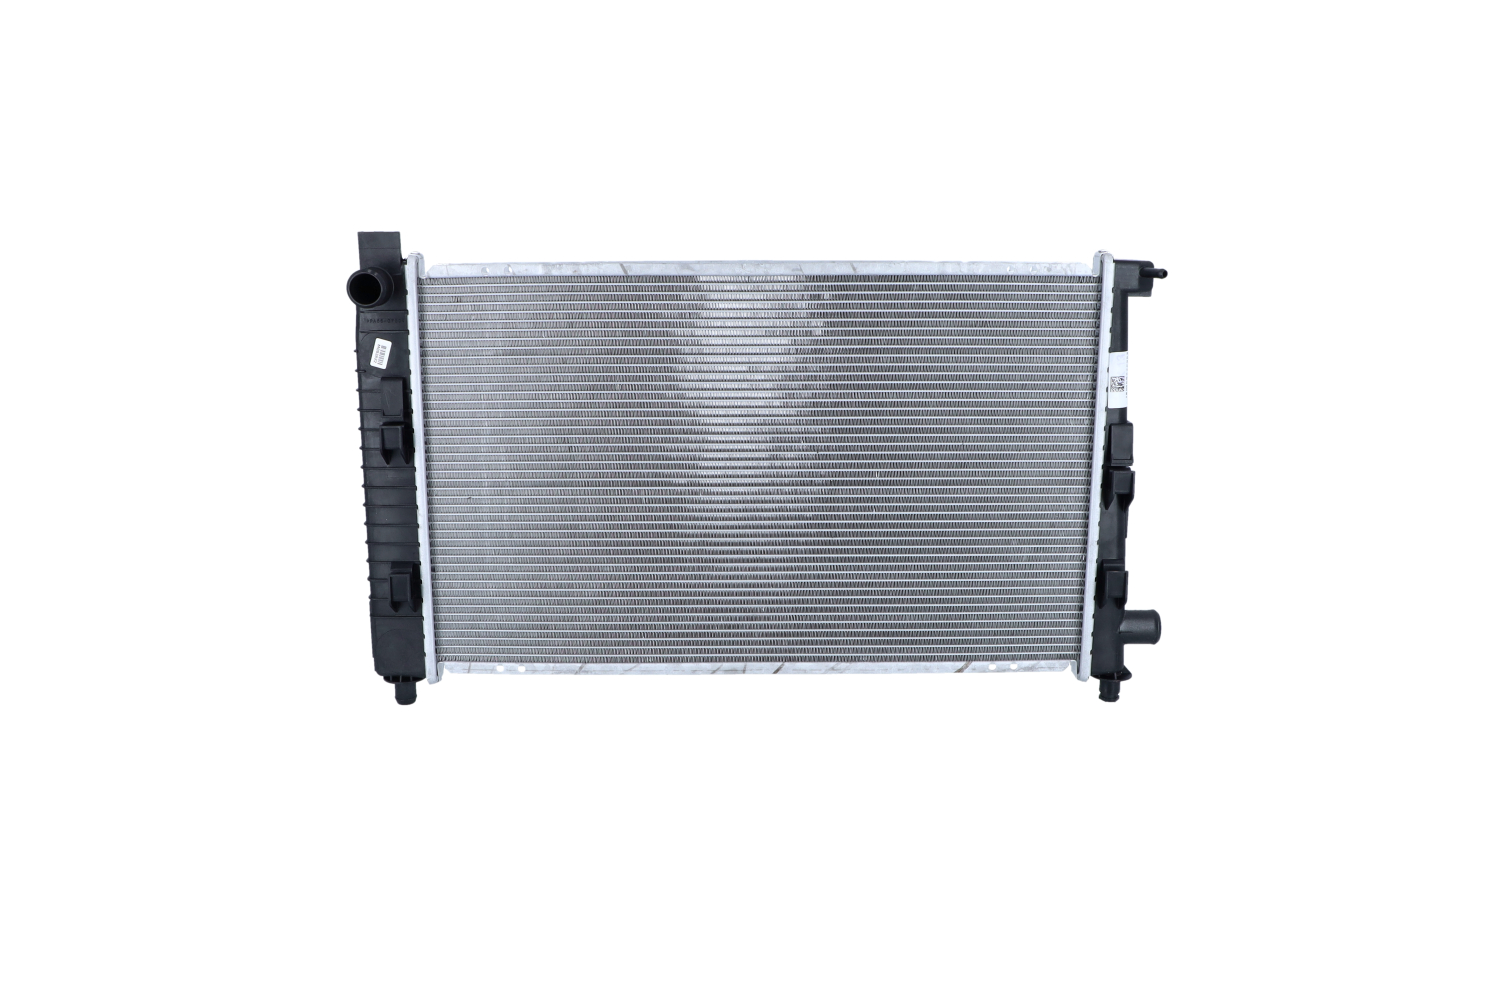 NRF 54719 Engine radiator Aluminium, 600 x 359 x 21 mm, with mounting parts, Brazed cooling fins